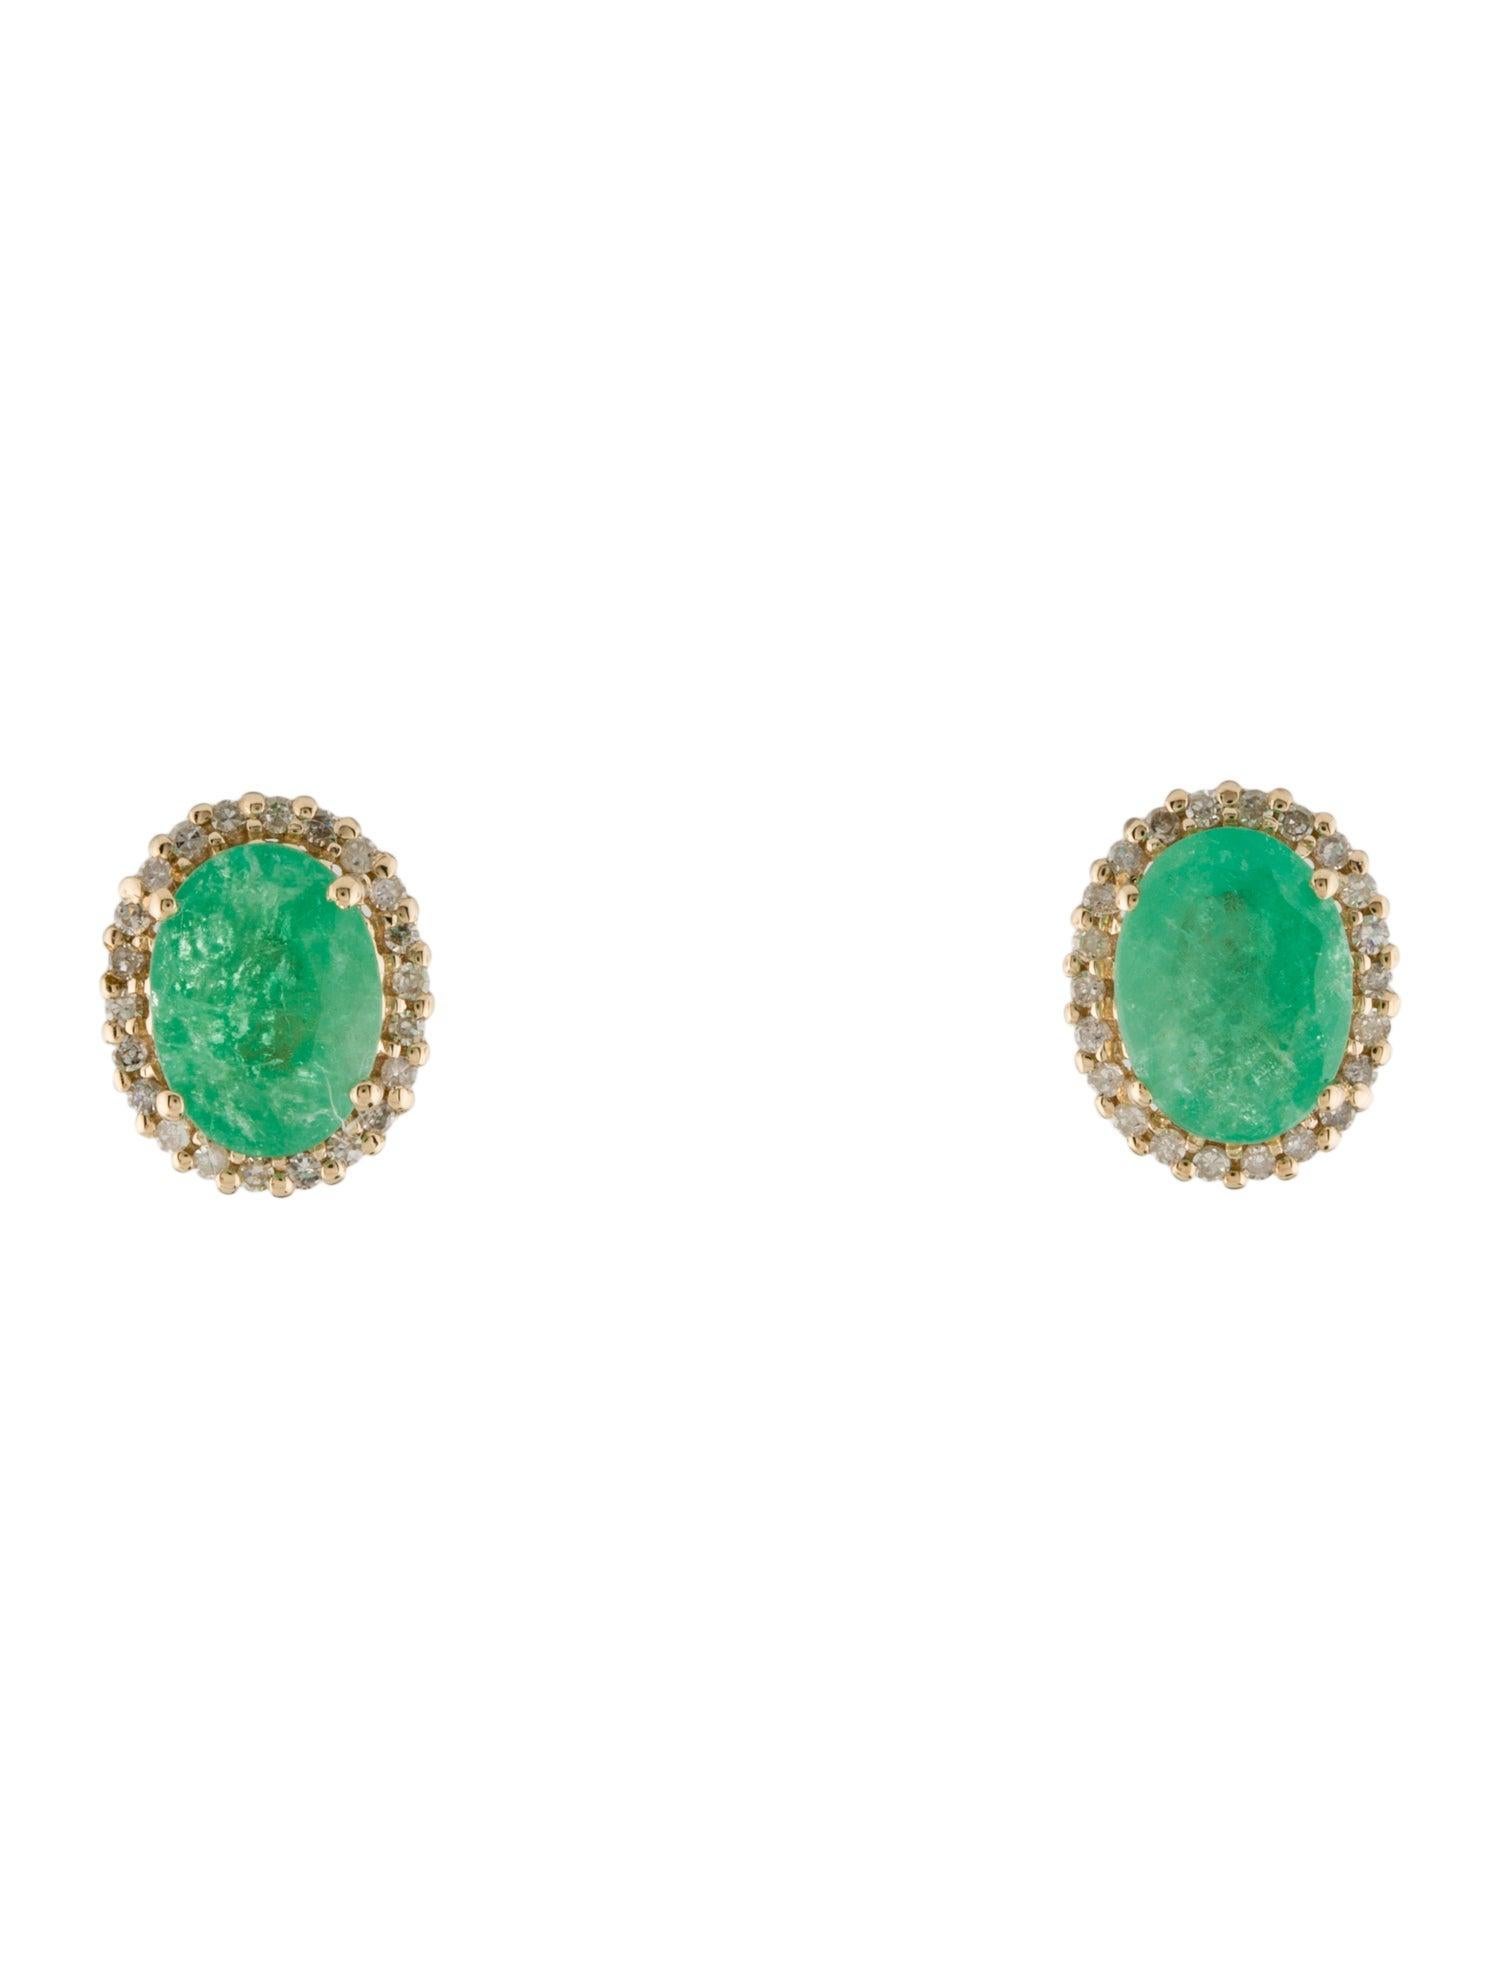 Unveil the allure of our 14K Yellow Gold Stud Earrings, a luxurious combination of vibrant green emeralds and sparkling near colorless diamonds. These exquisite earrings feature oval modified brilliant emeralds, set in the lustrous warmth of 14K